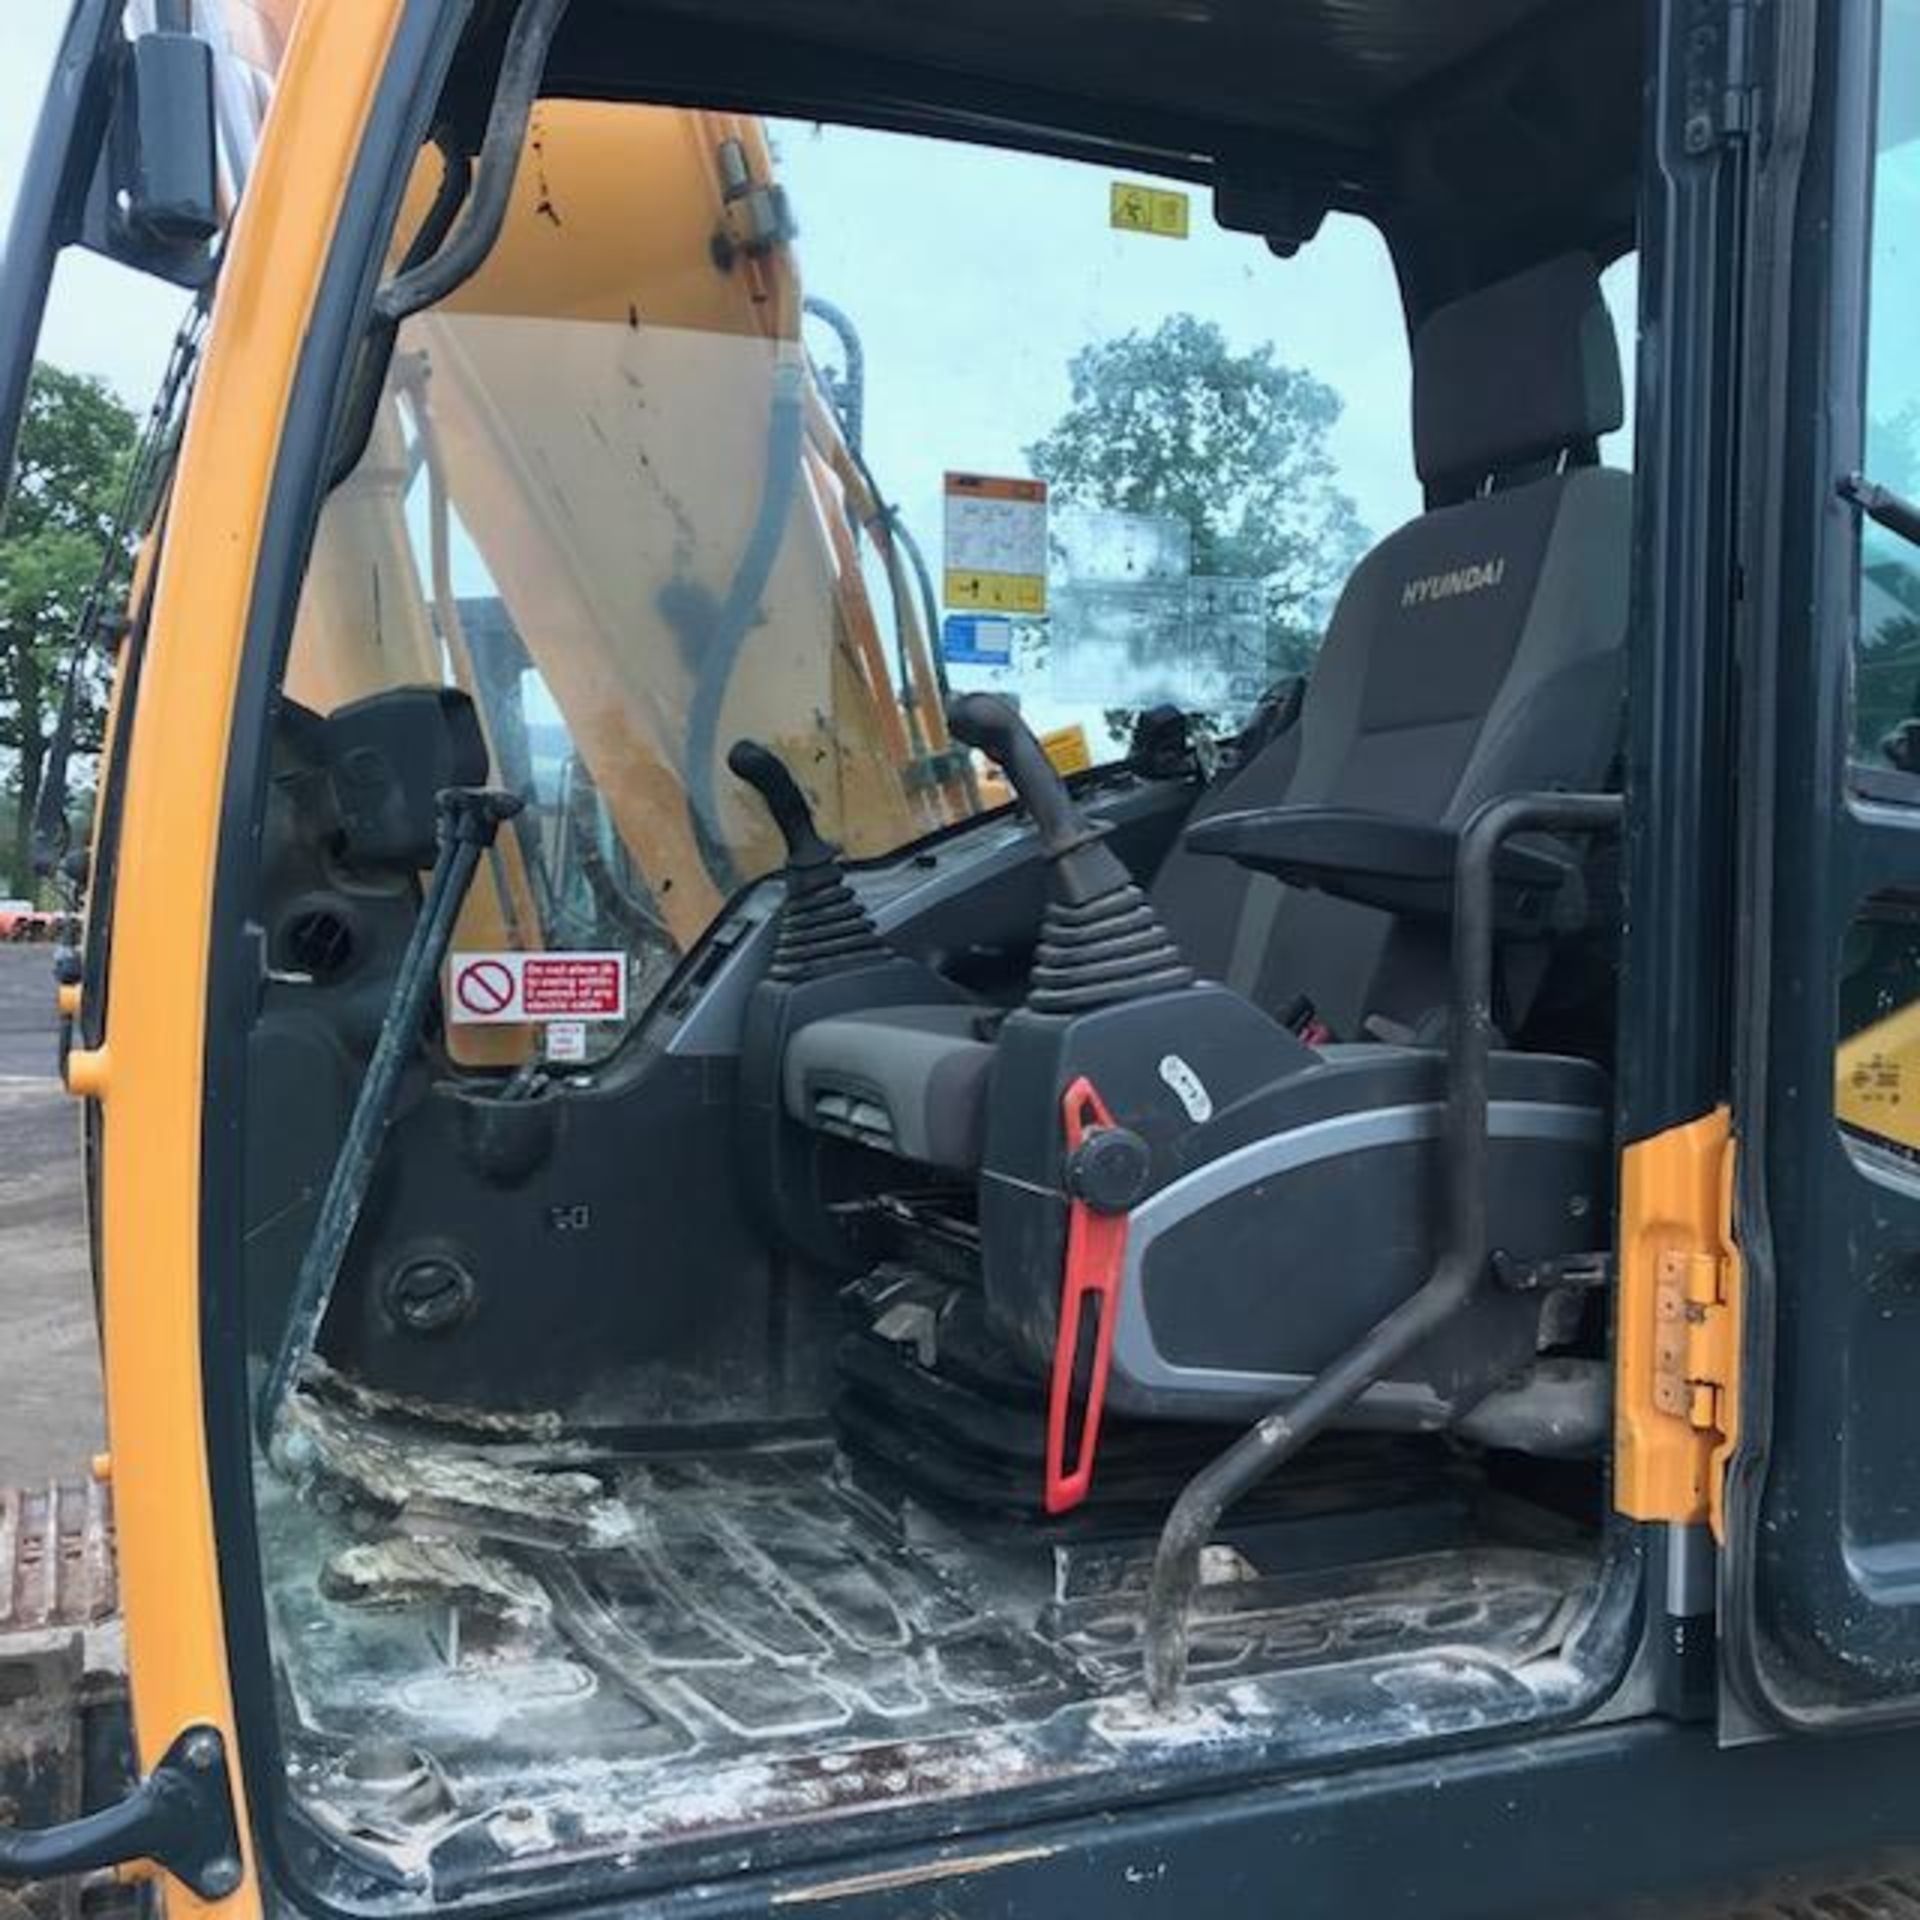 2016 Hyundai R140 LC -9A 14 tonne steel tracked excavator - Image 19 of 27